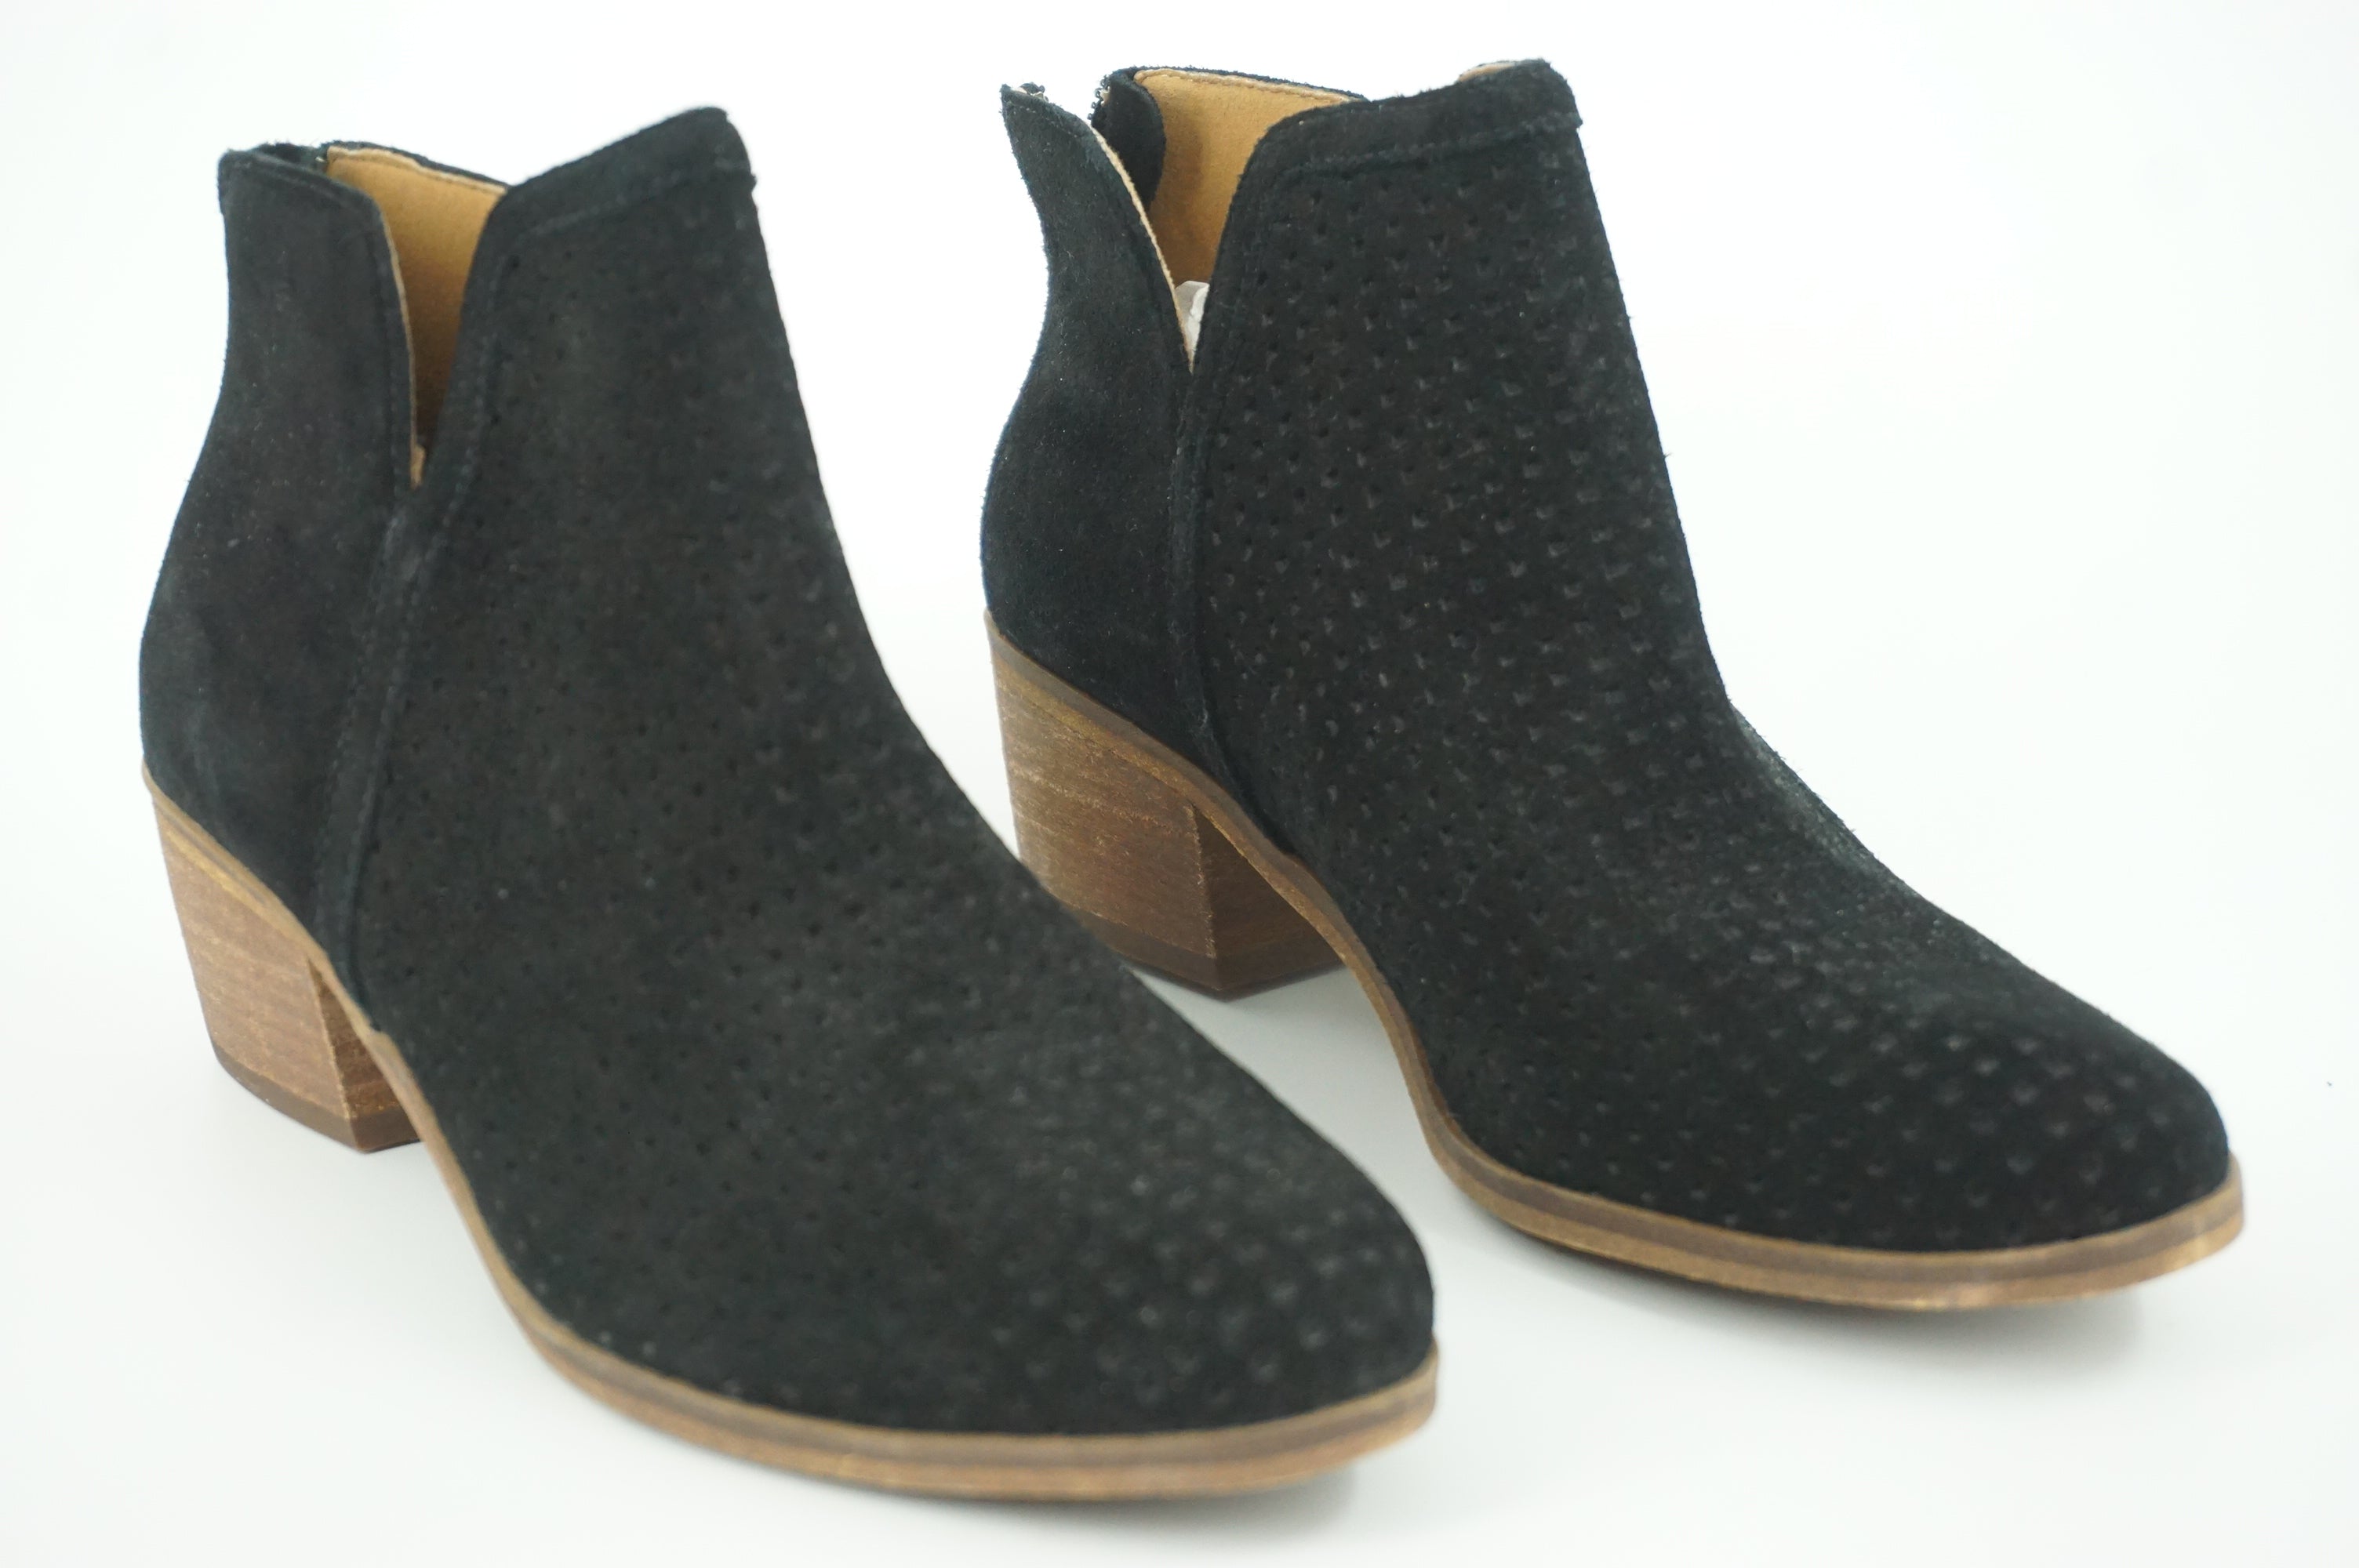 Susina Kyle Black Perforated Suede ankle booties size 6 New $99